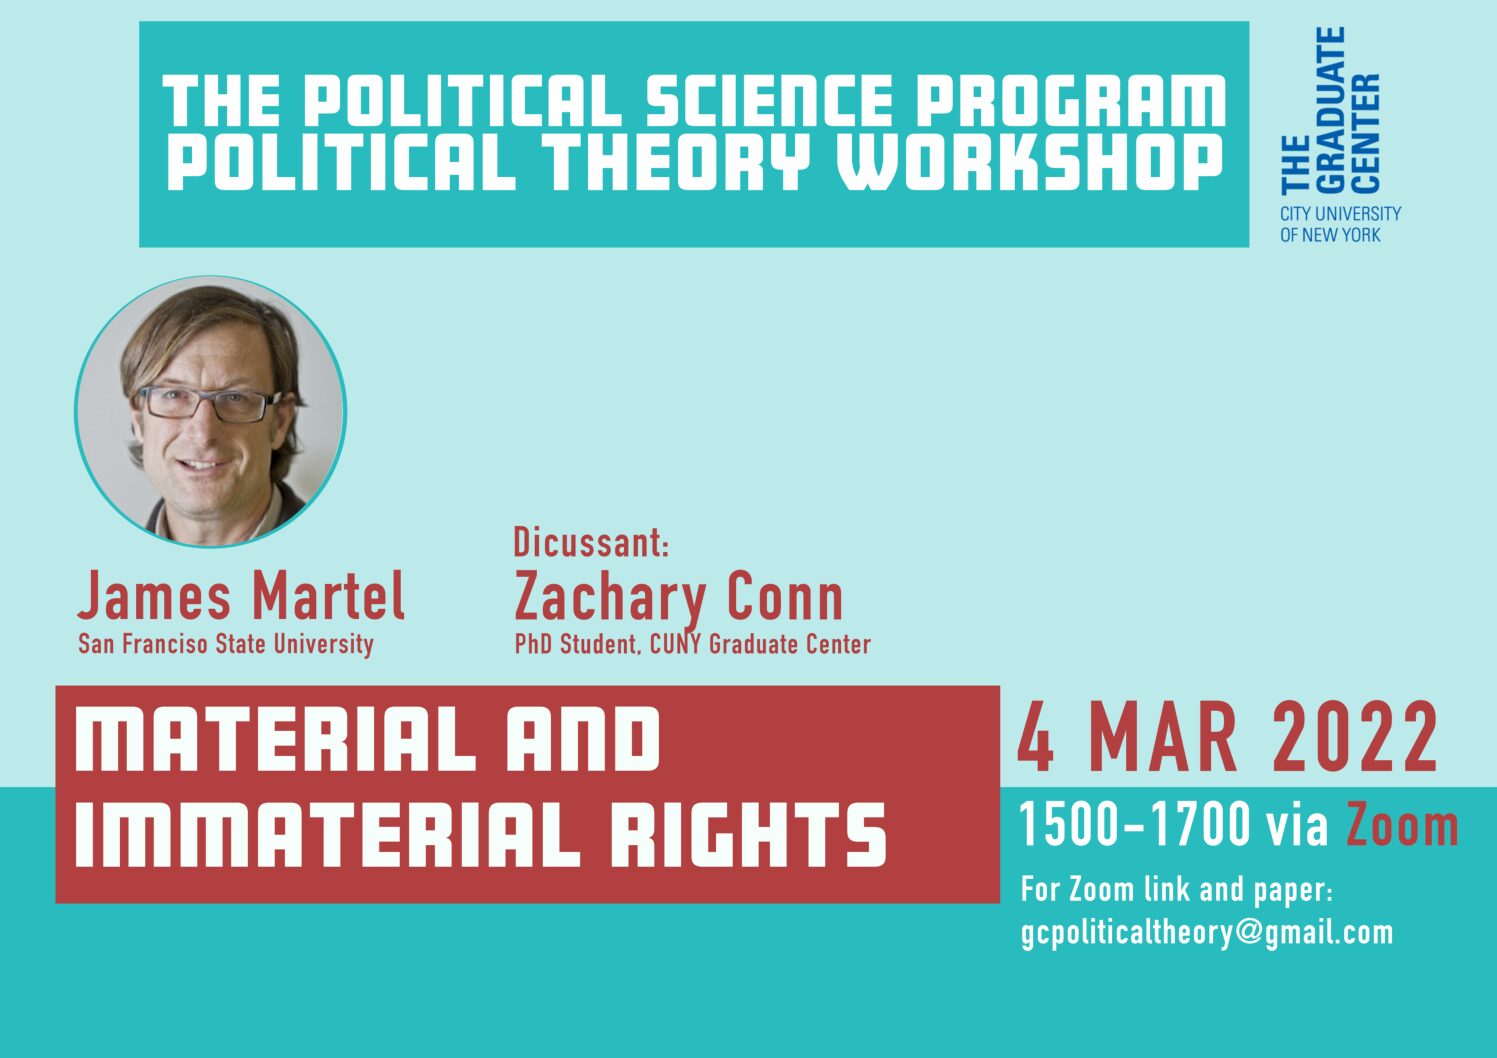 Political Theory Workshop: James Martel, "Material and Immaterial Rights," Friday, March 4, 3:00-5:00PM